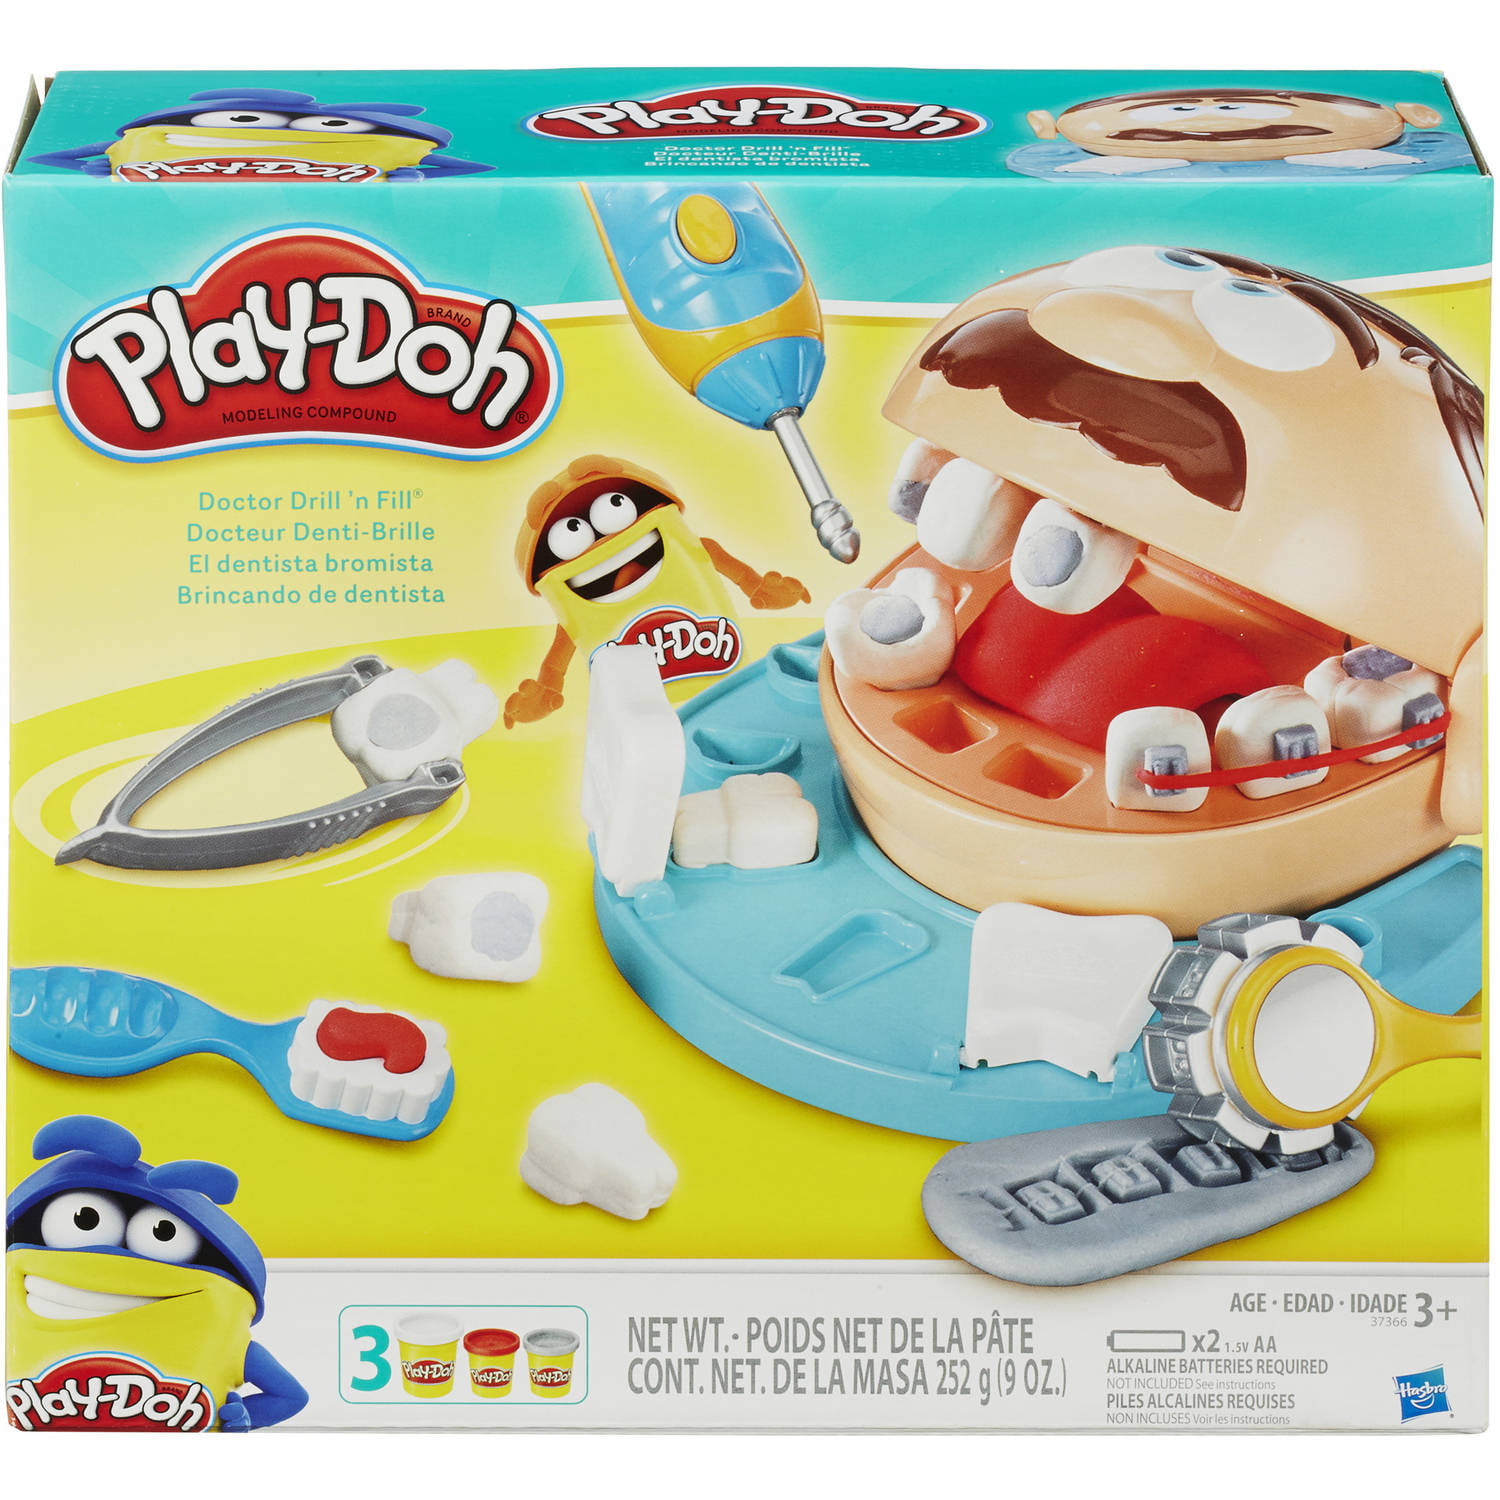 Details about   Play Doh Kids Doctor Roleplay Toy Dentist Drill And Fill Fun Interactive Playset 